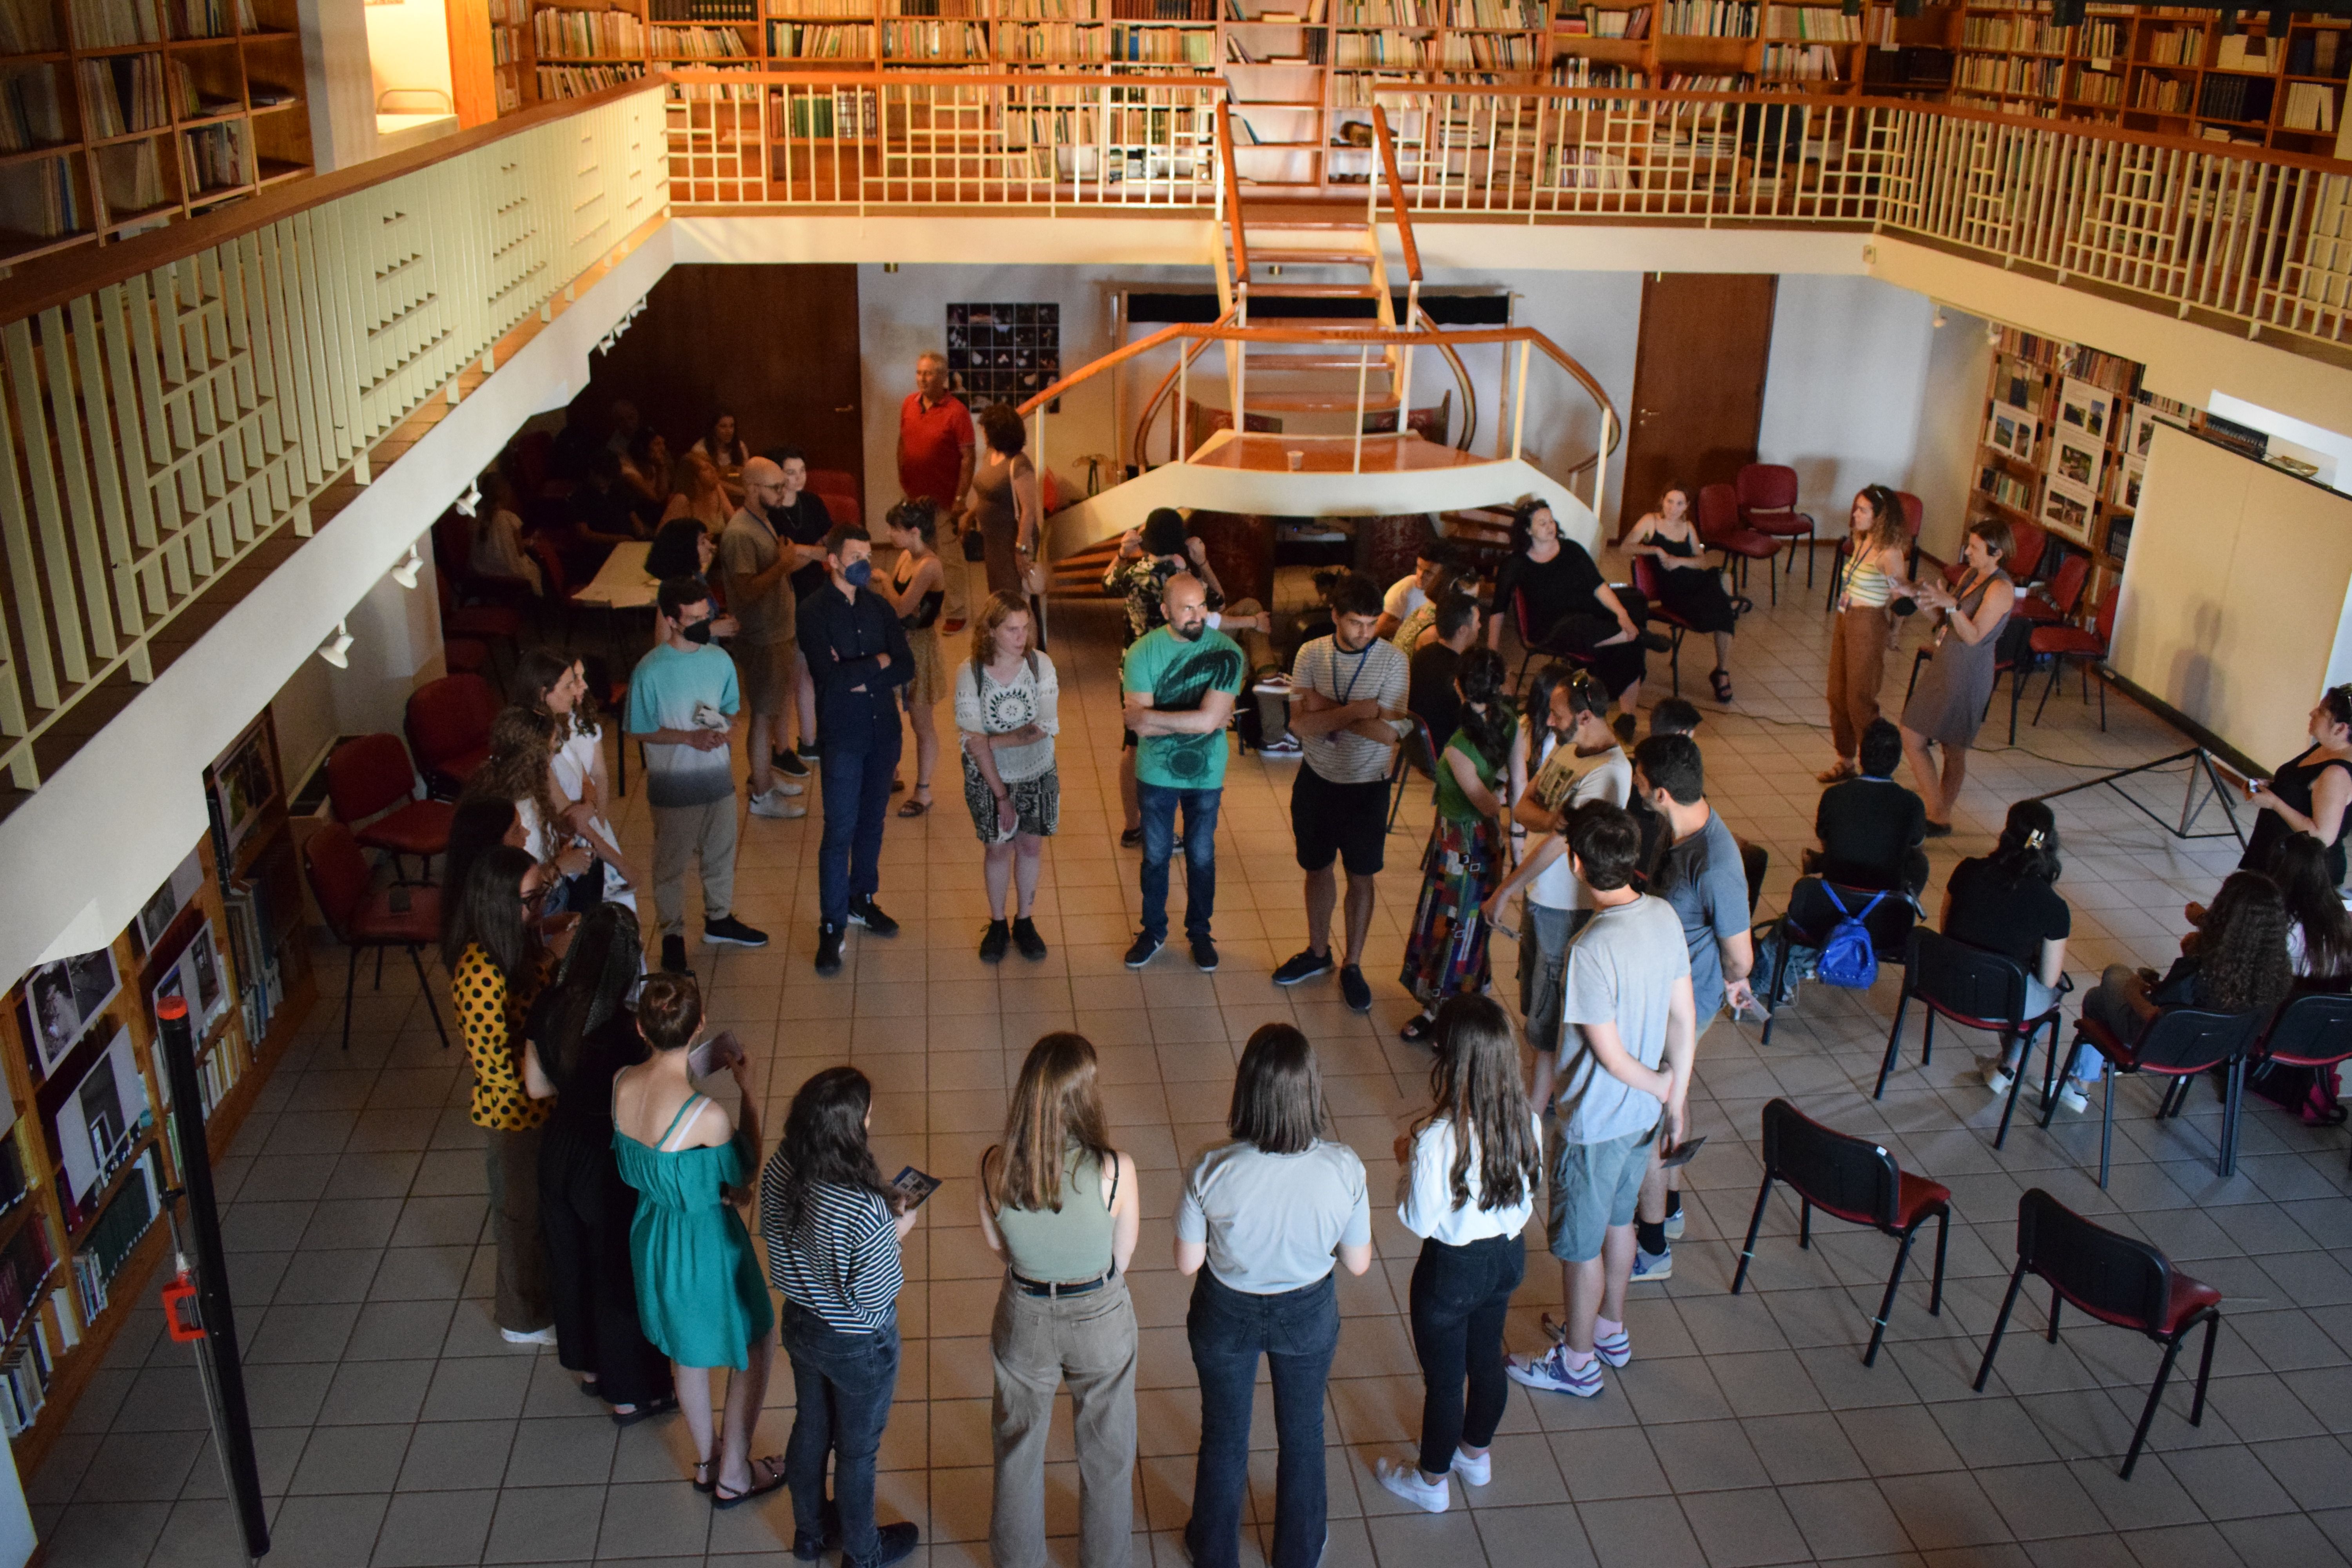 Group of people standing in a circle in a large room with an upstairs library balcony.